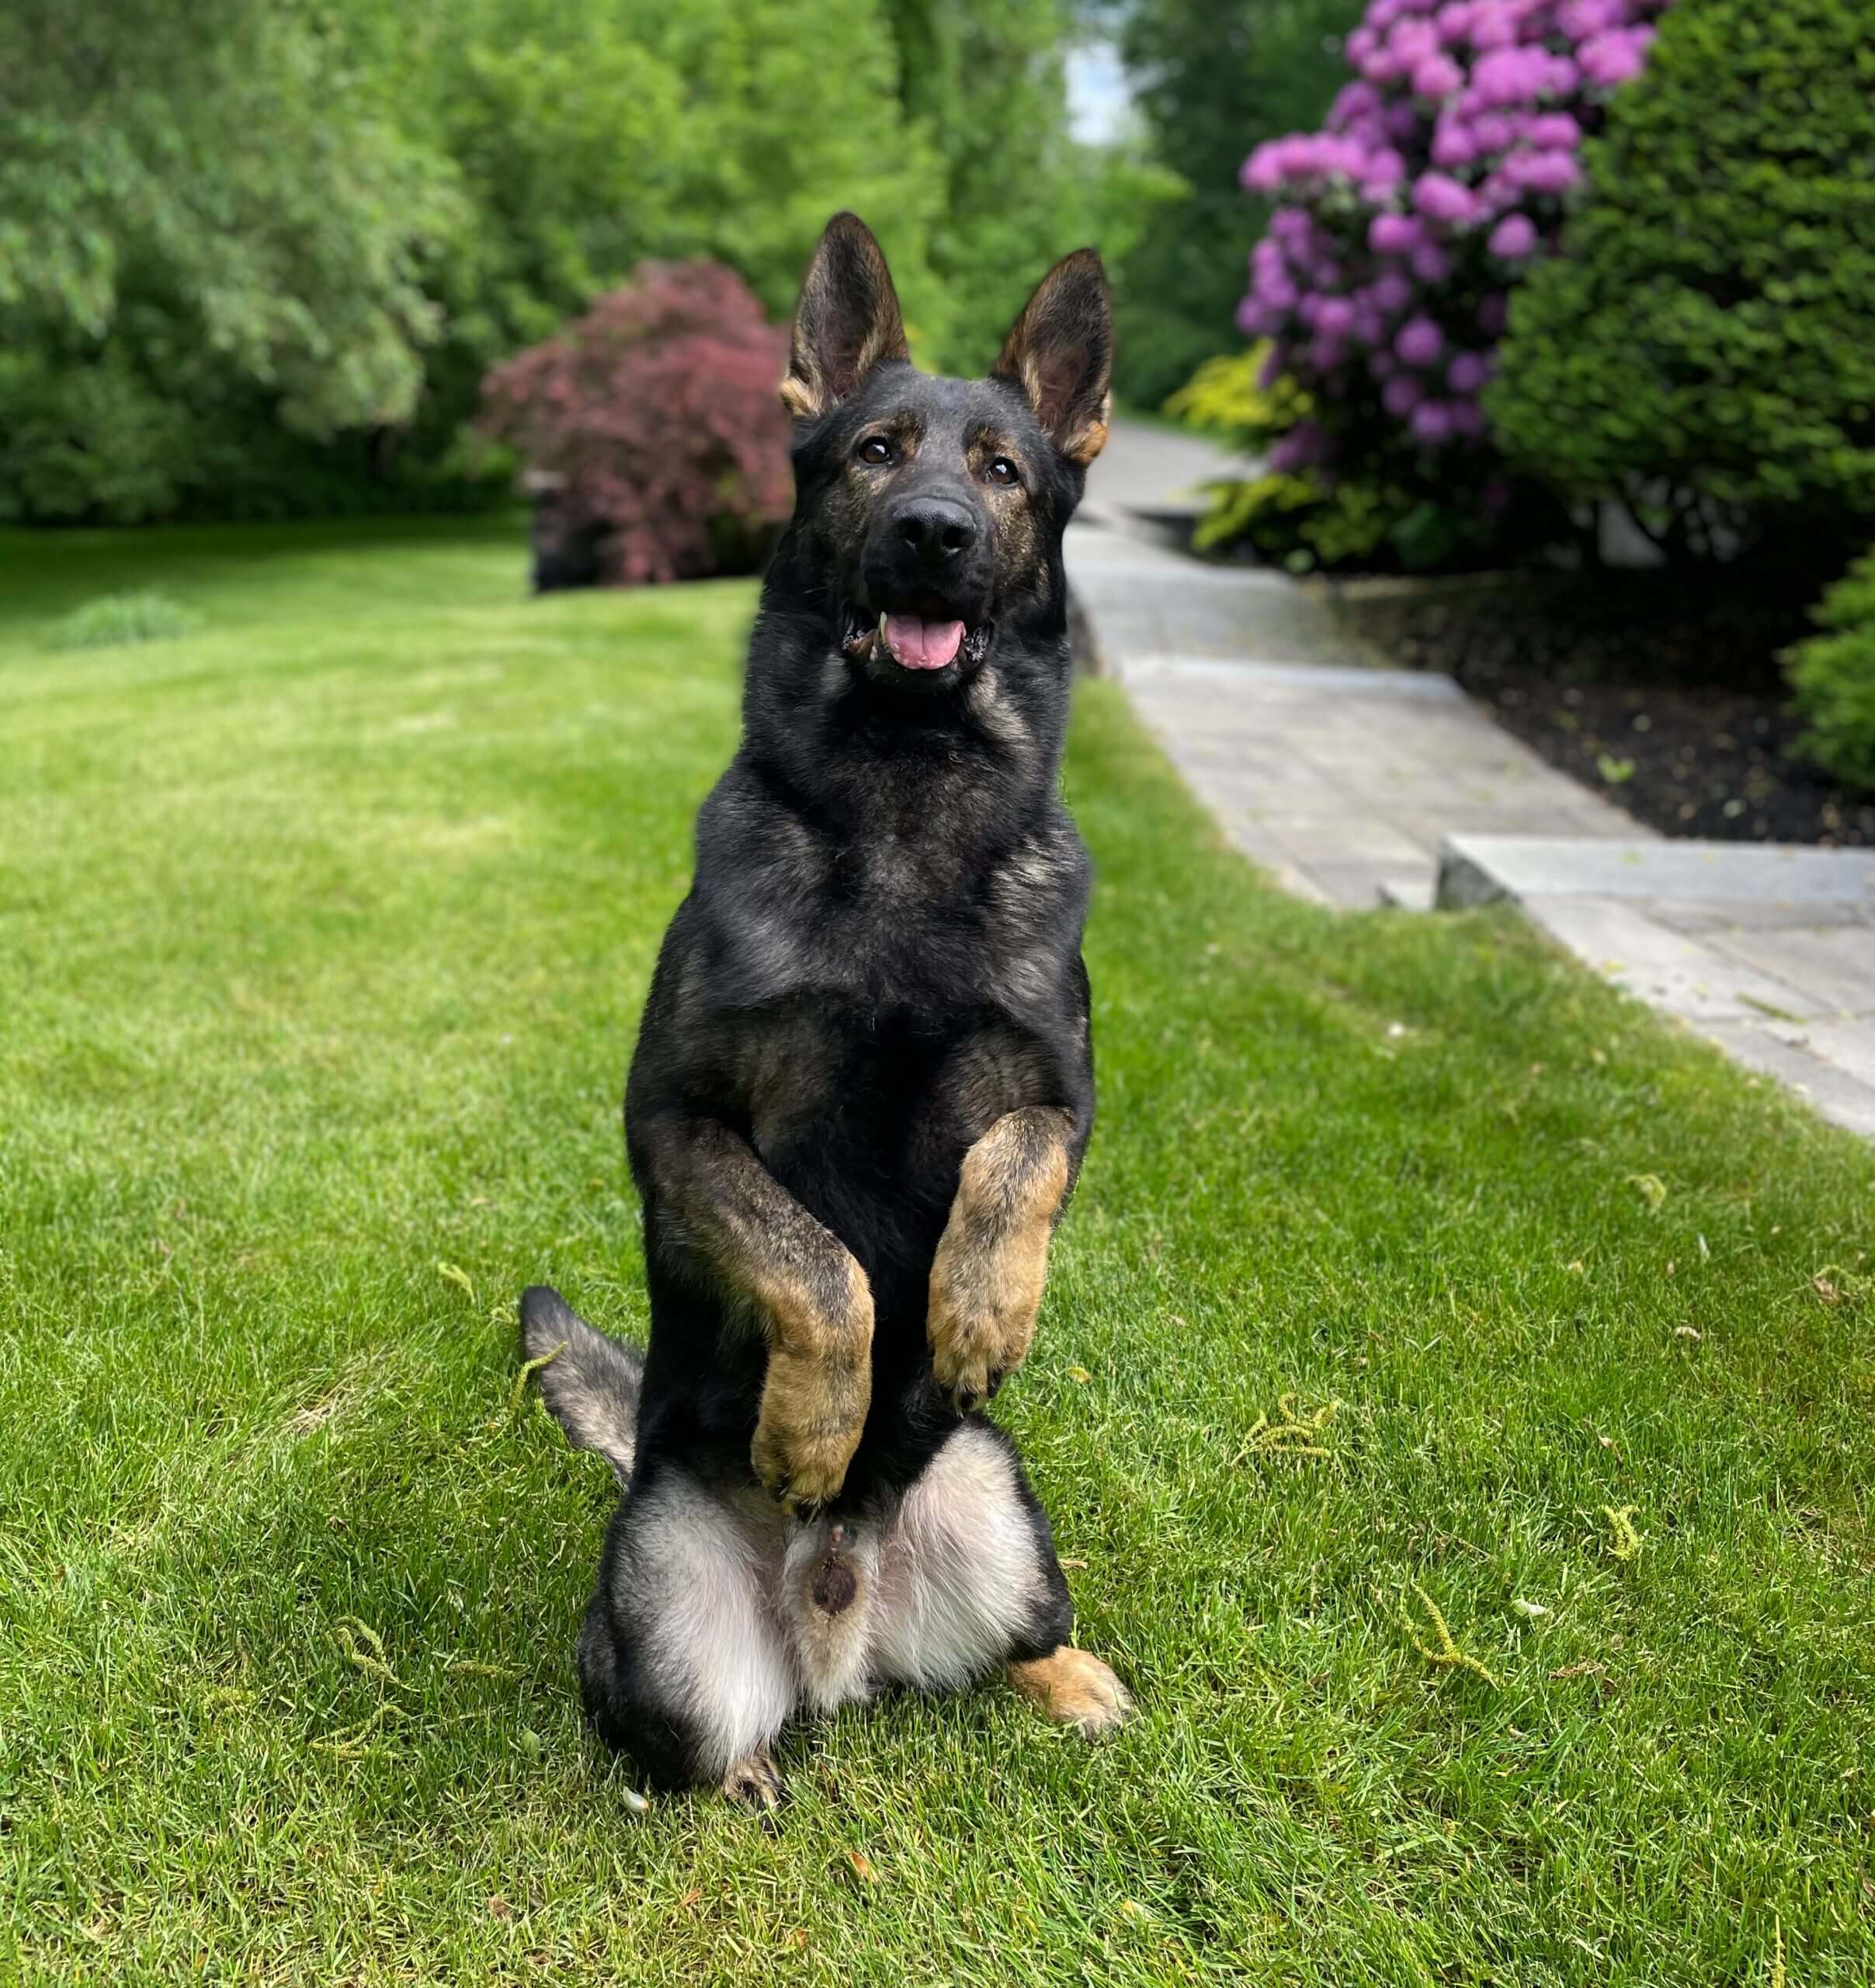 Protection dog sitting in a yard